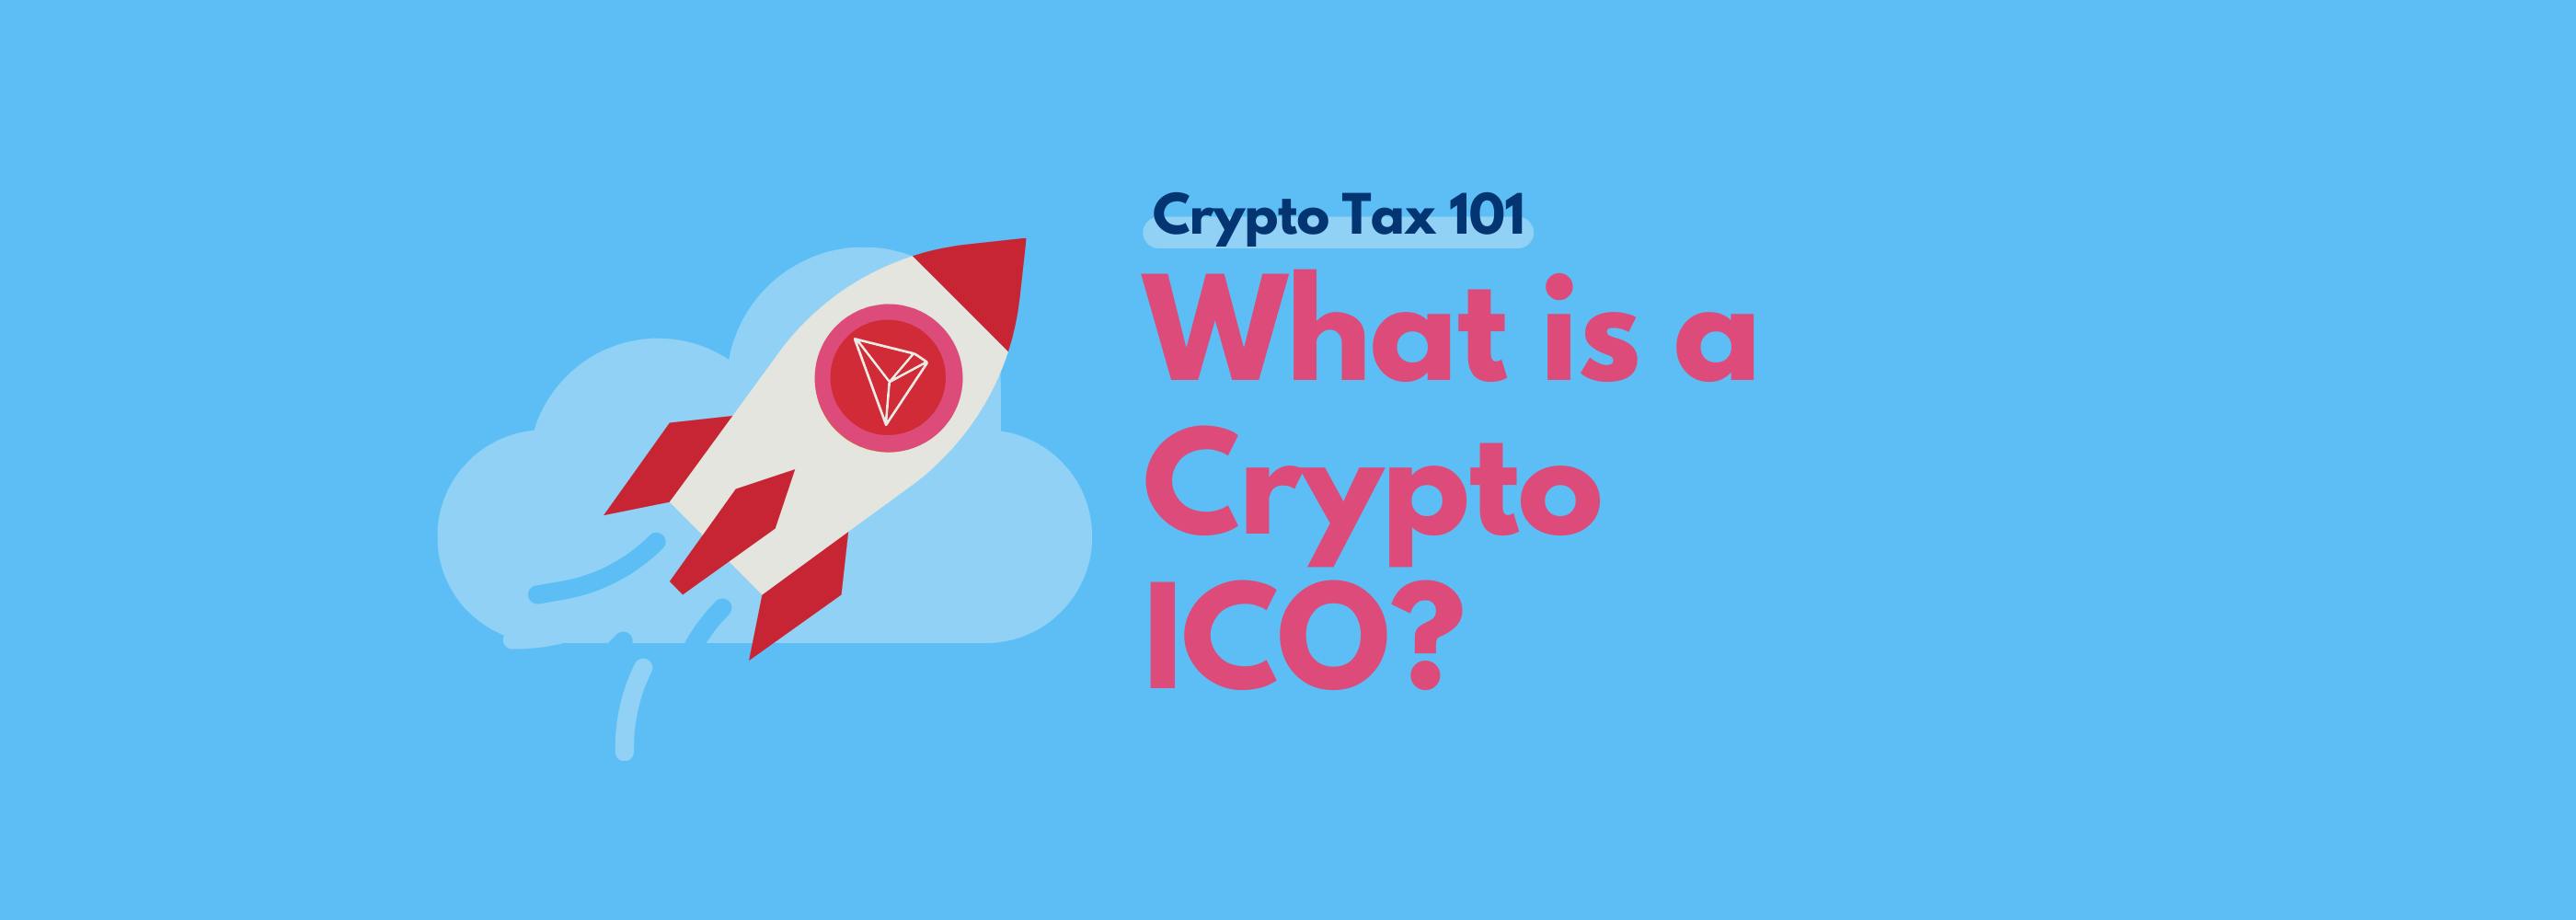 What is a crypto ICO and how is it taxed?